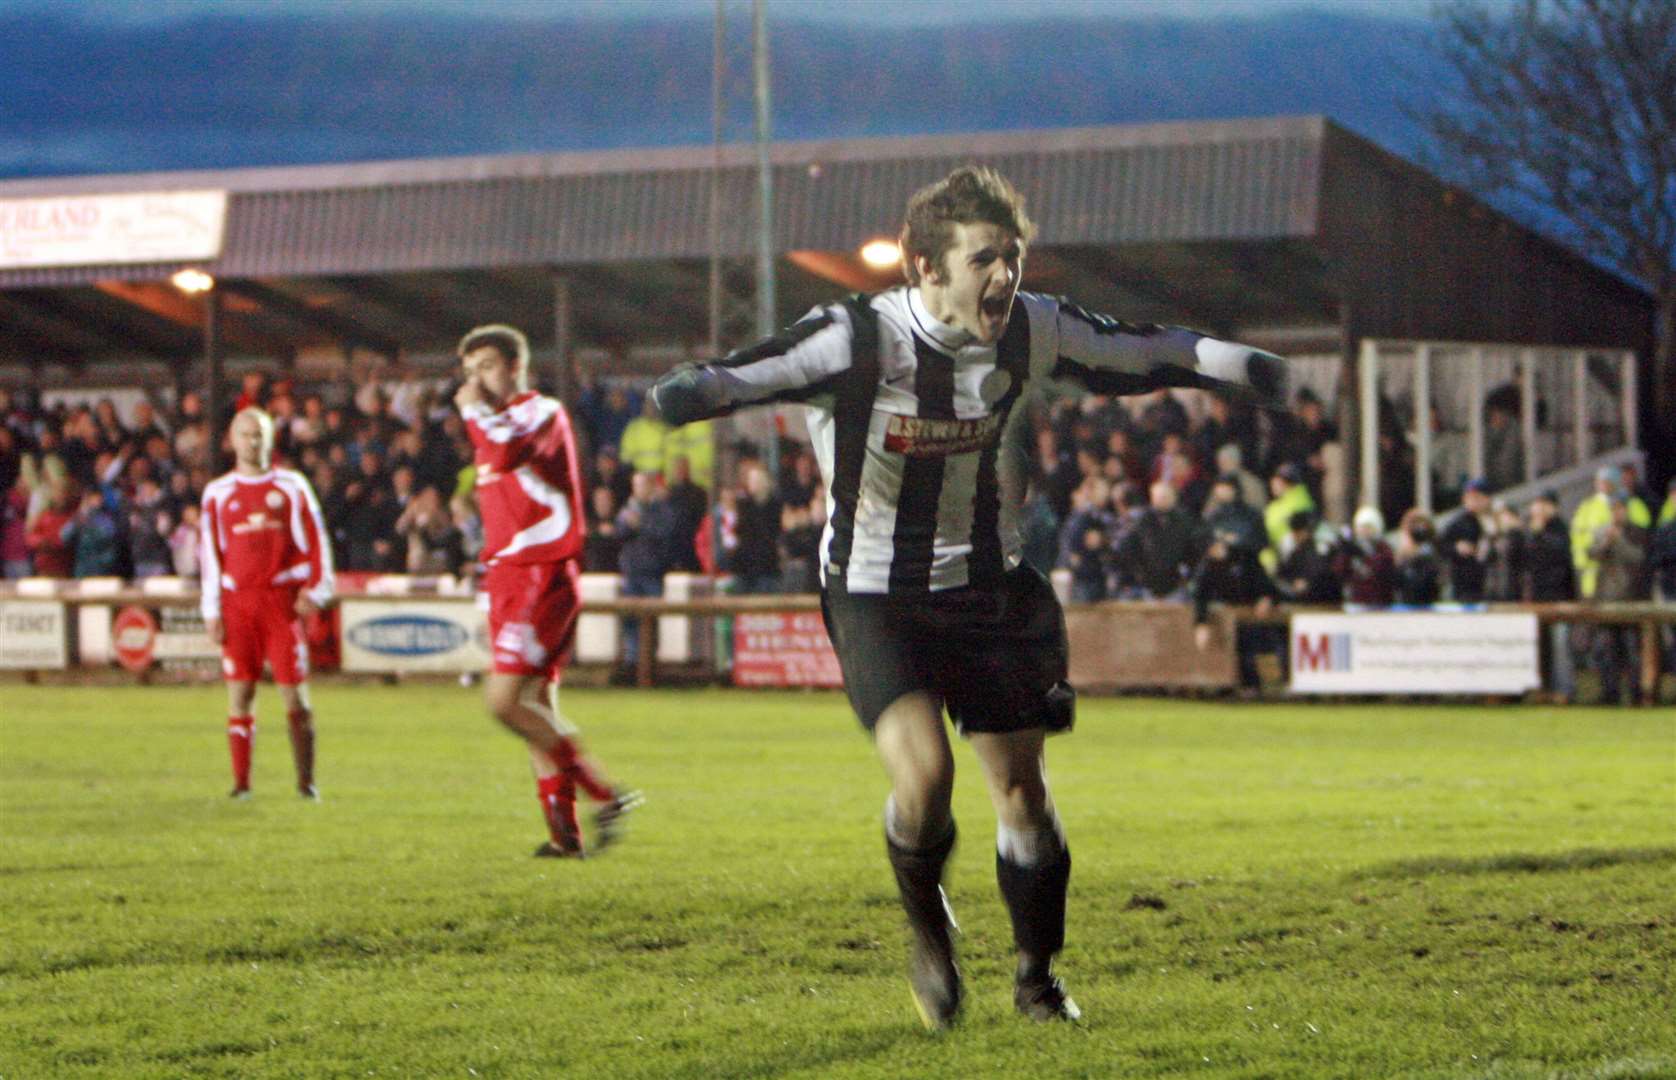 Sam Mackay celebrates after his penalty put Wick Academy 4-2 up against Brechin City in their memorable Scottish Cup draw at Harmsworth Park in November 2009. Picture: James Gunn